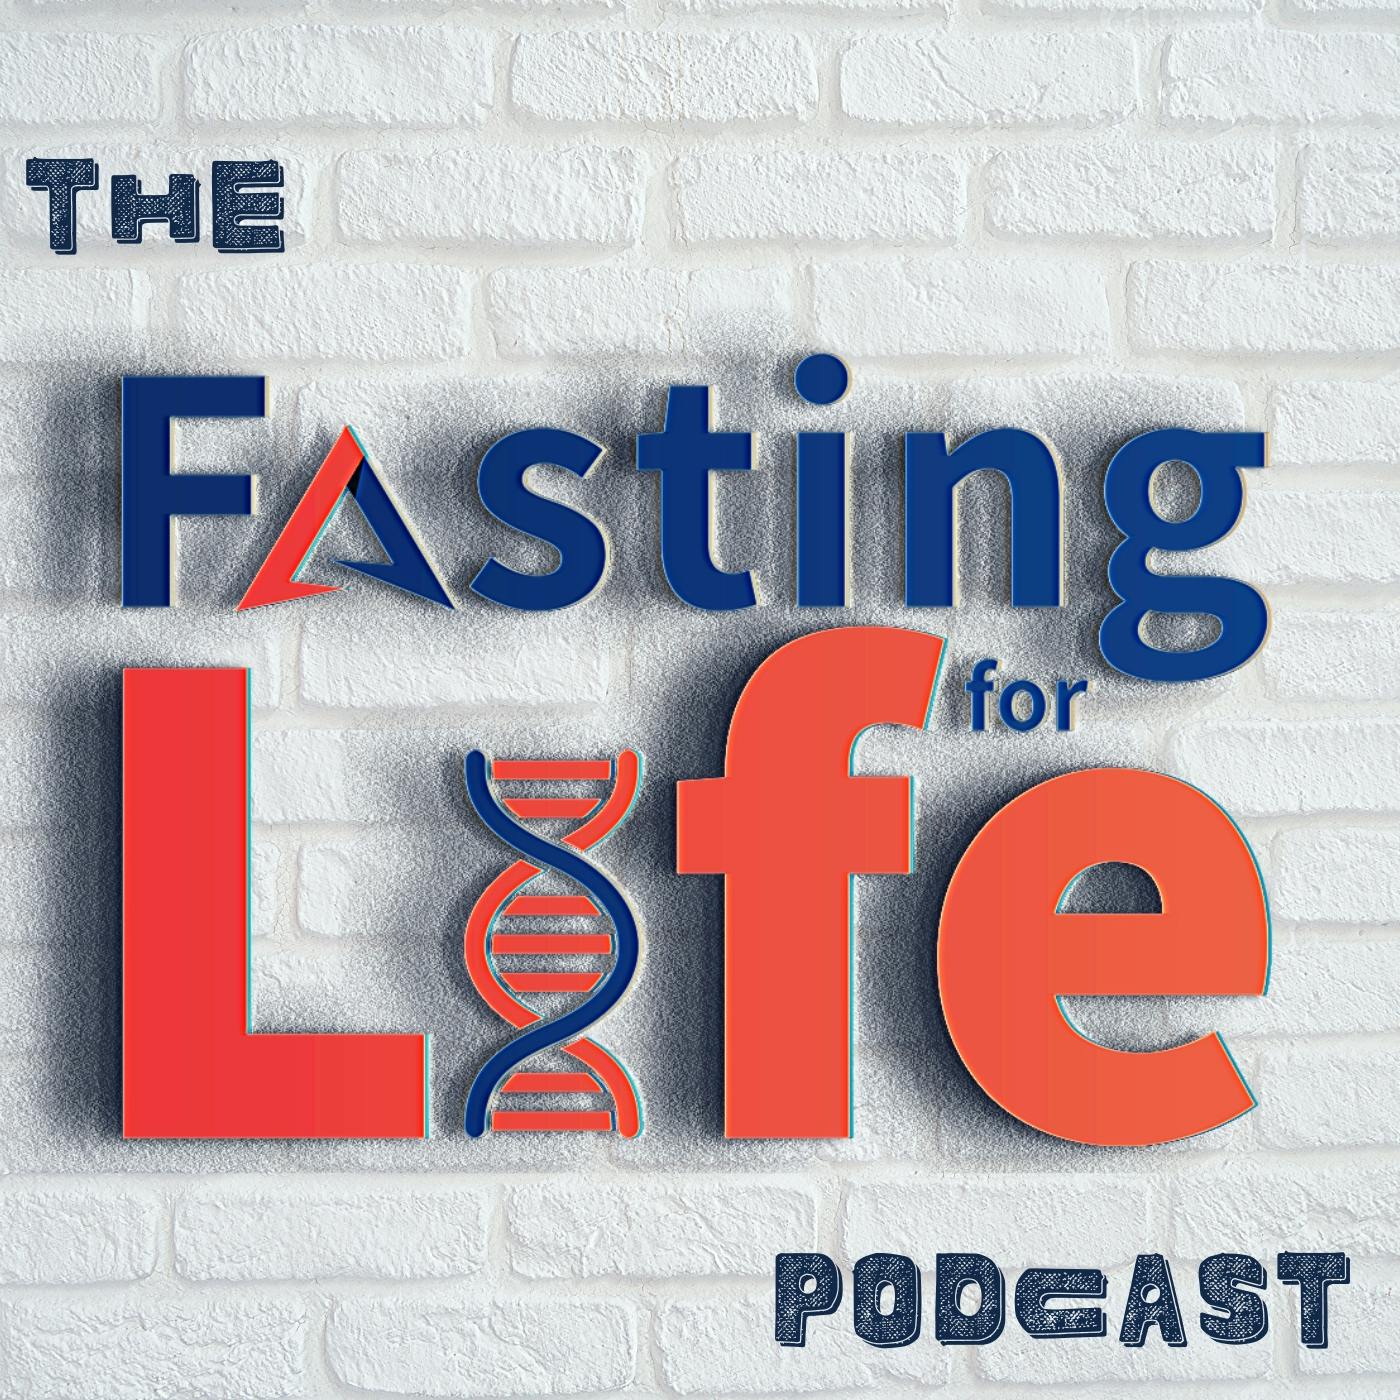 Ep. 9 - Fasting Growth Hormone Boost, Metabolism, Muscle Building | Fat Burning, Ketosis, Thyroid, Natural Intermittent Fasting in Children | One Meal a Day Fasting Plan